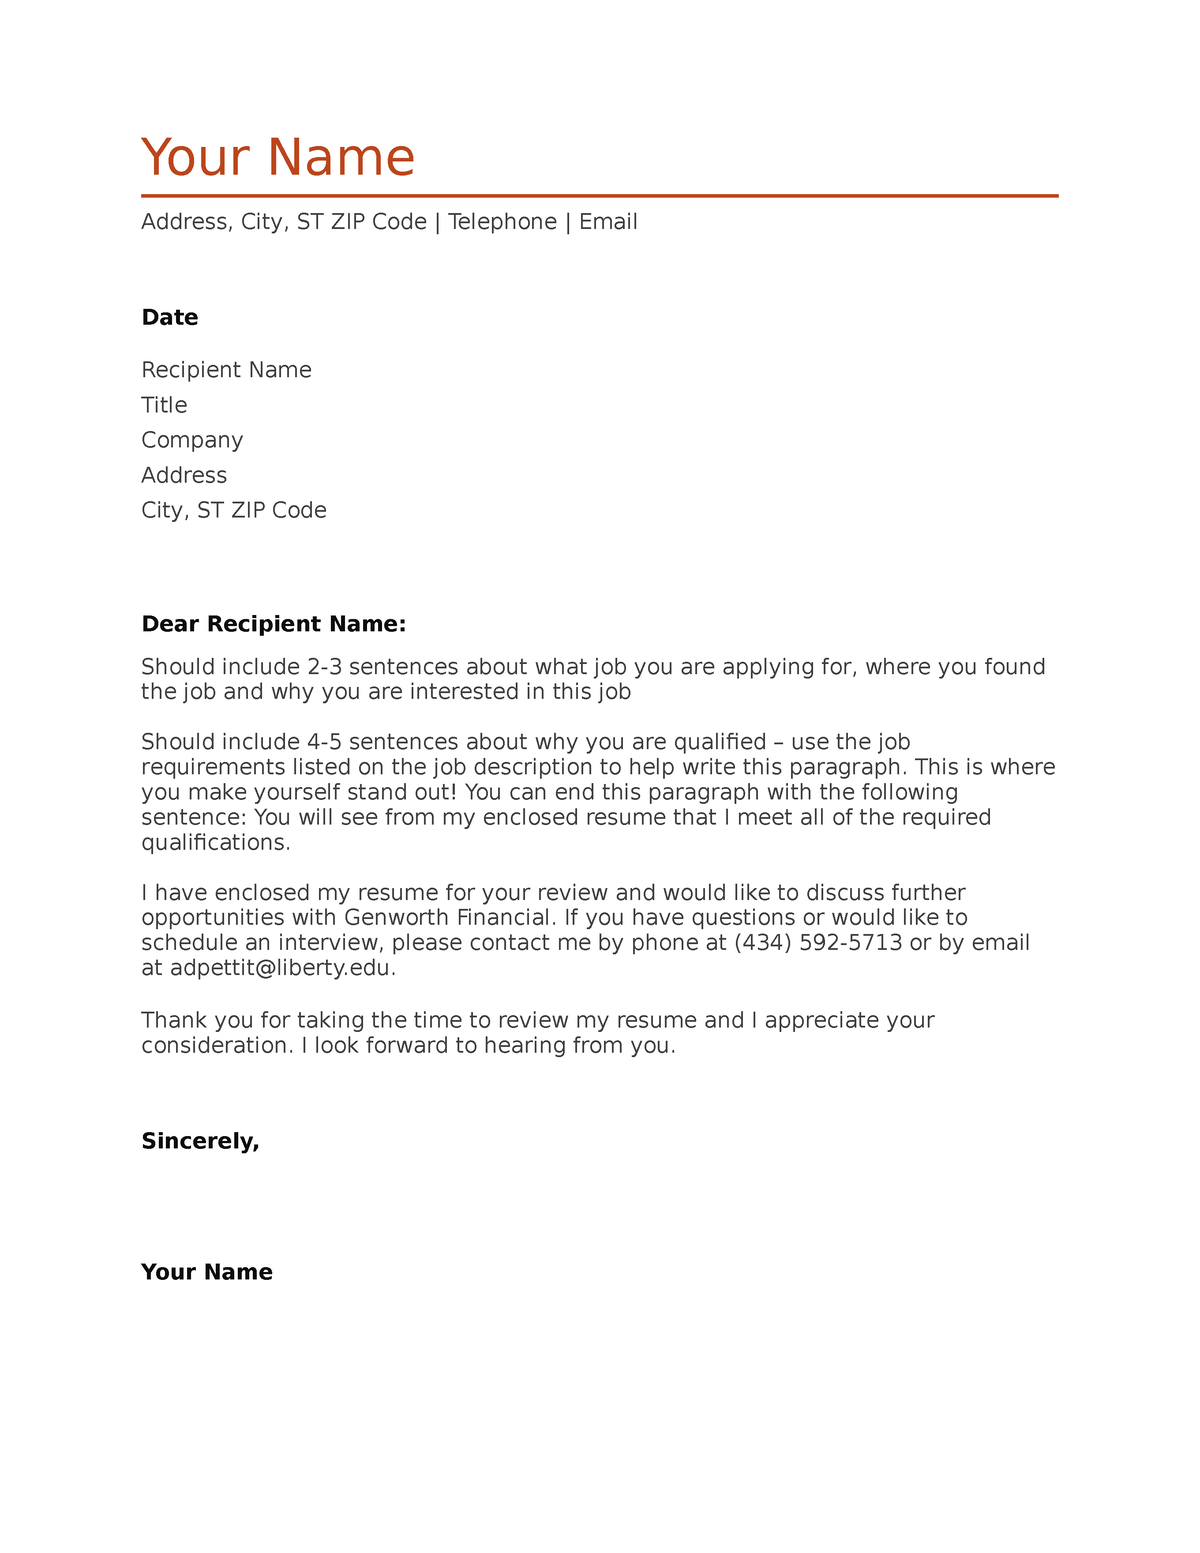 Cover Letter Template - name says it all - Your Name Address, City, ST ...